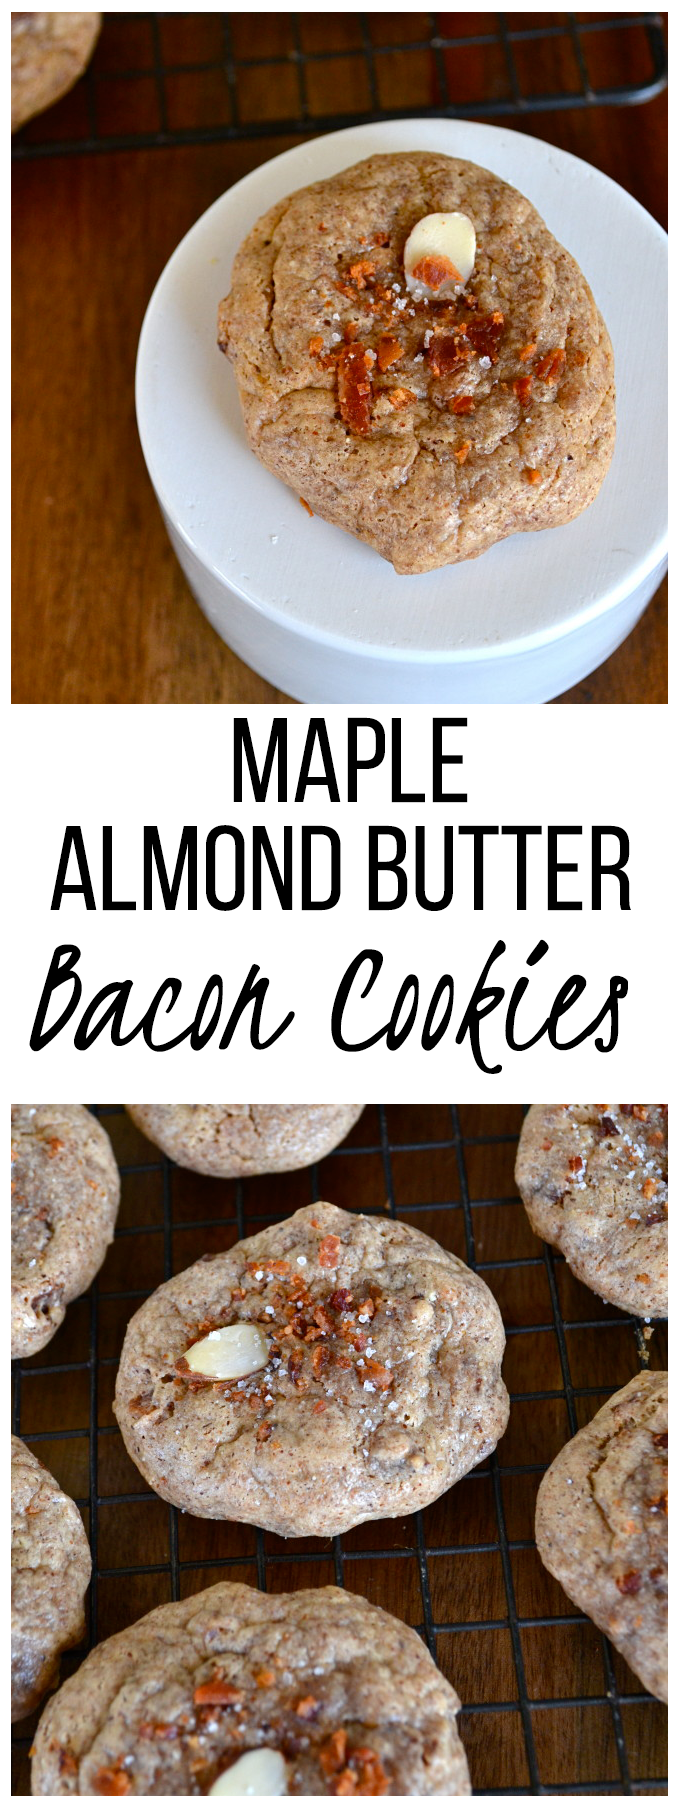 Maple Almond Butter Bacon Cookies - Grain free, paleo and so tasty!